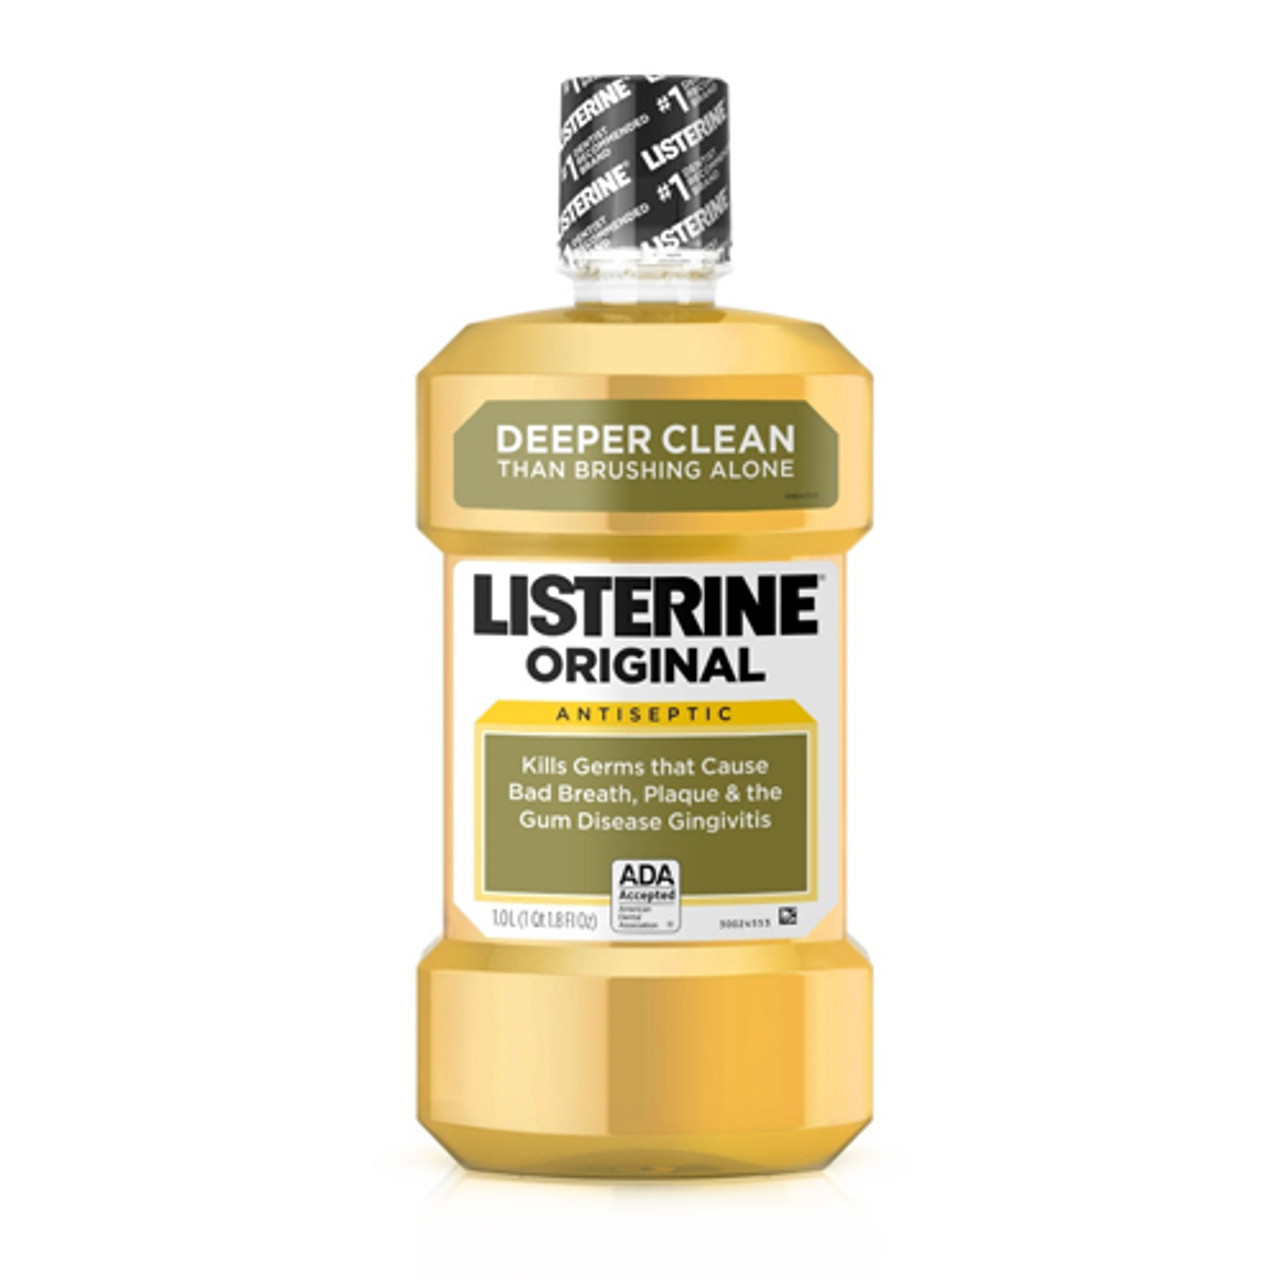 Listerine Cool Mint Antiseptic Mouthwash/Mouth Rinse for Bad Breath &  Plaque, 1 L